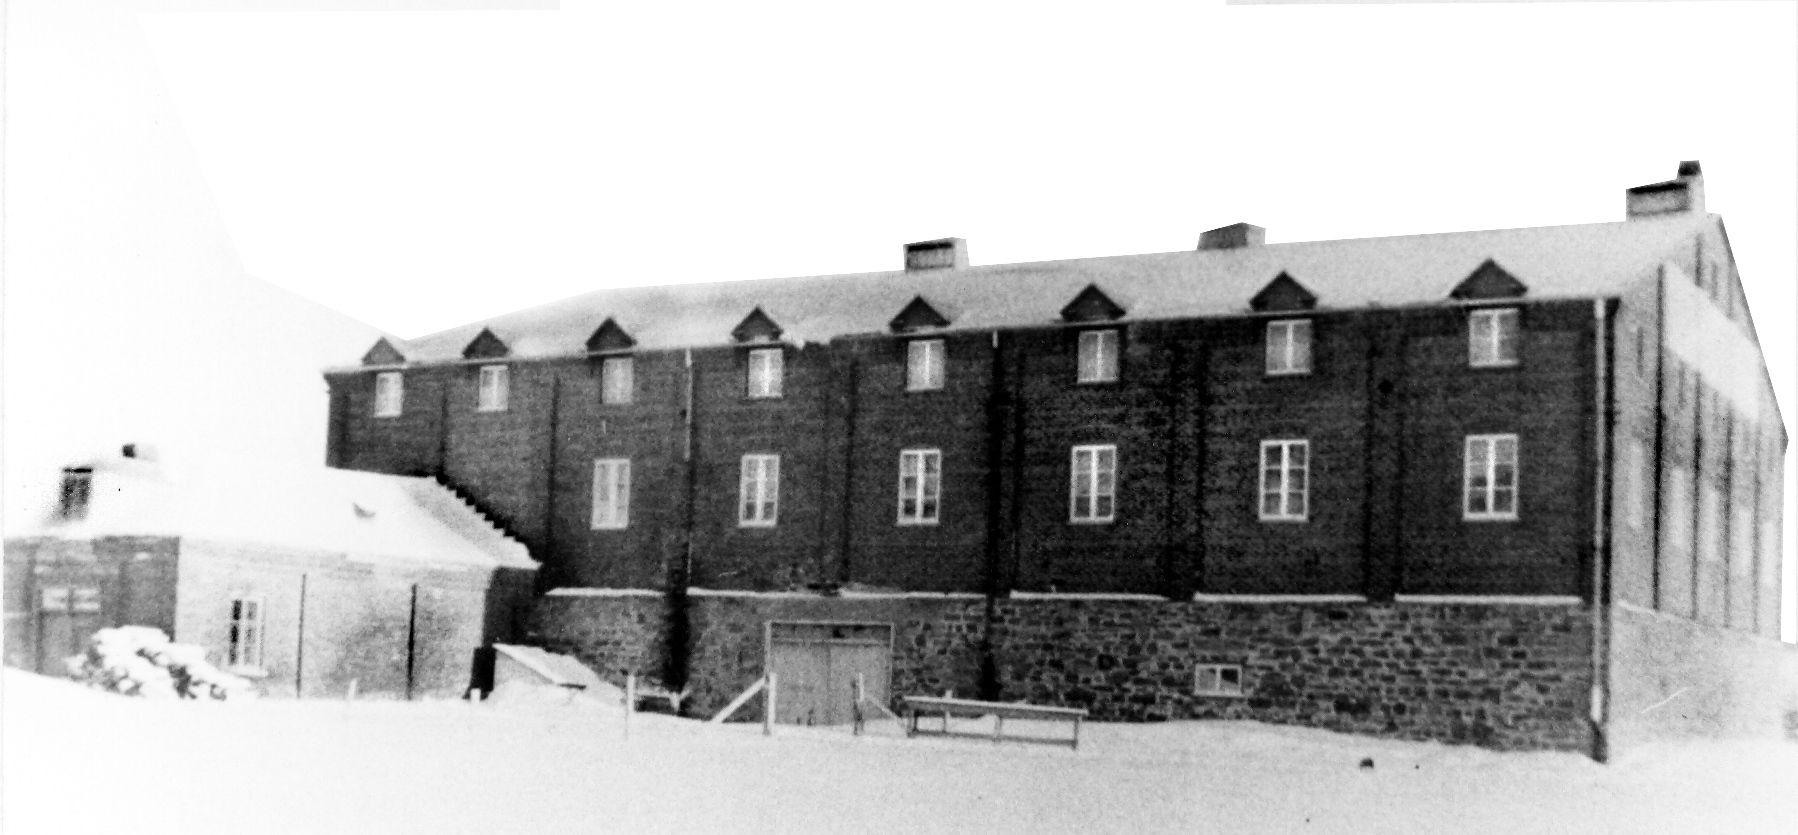 Black and white archival photo showing the A. Toussaint & Cie winery, a large, two-storey brick building. The façade features two rows of eight windows.